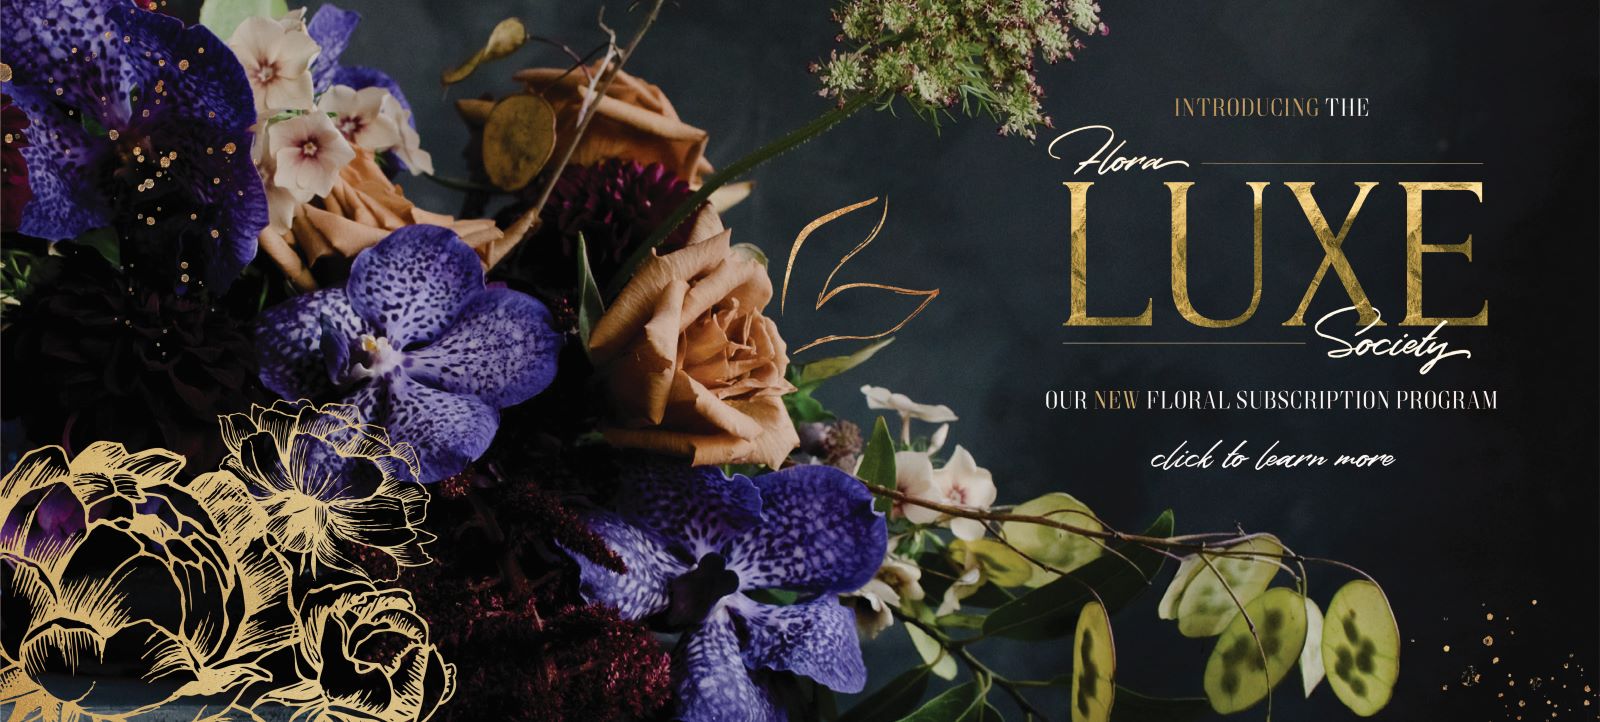 Floral luxe Society our new floral subscription program